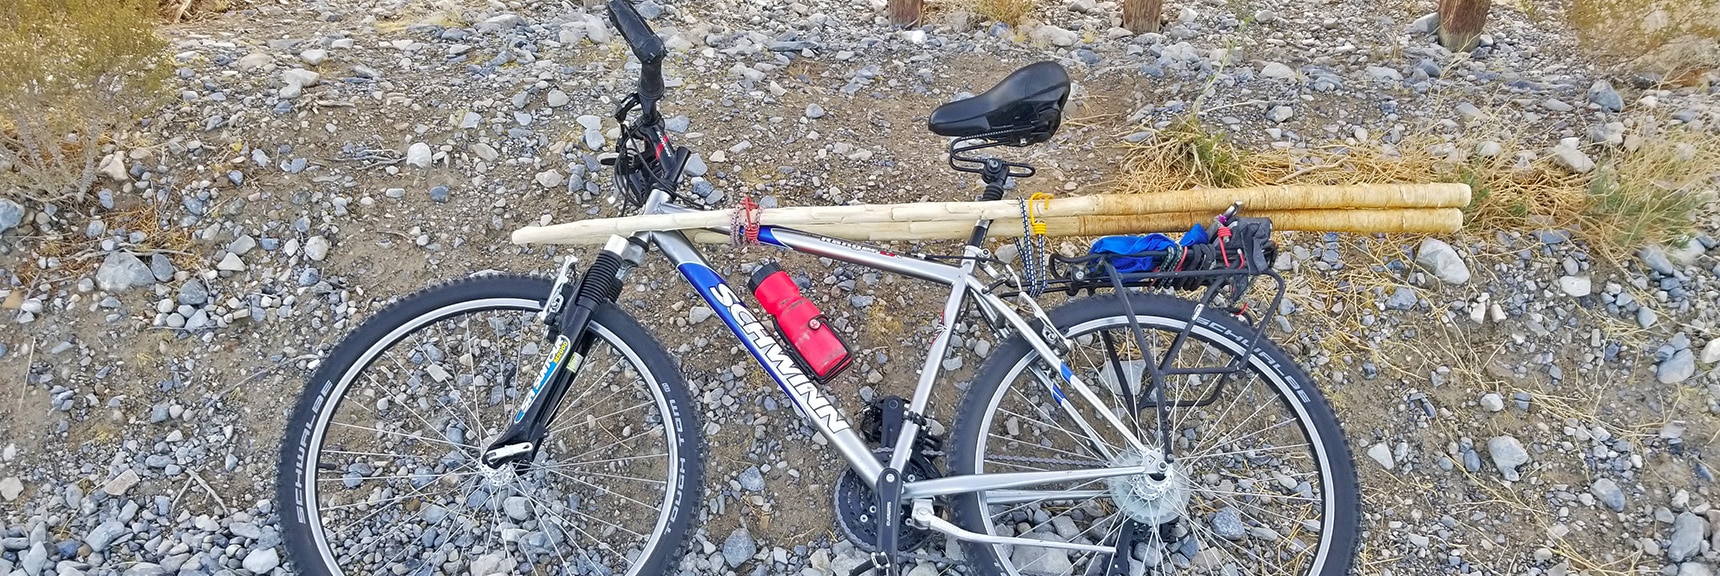 Mountain Bike Fitted for Hybrid Cycling on Gravel Roads & Climbing Adventure | Cow Camp Road | Sheep Range | Desert National Wildlife Refuge, Nevada